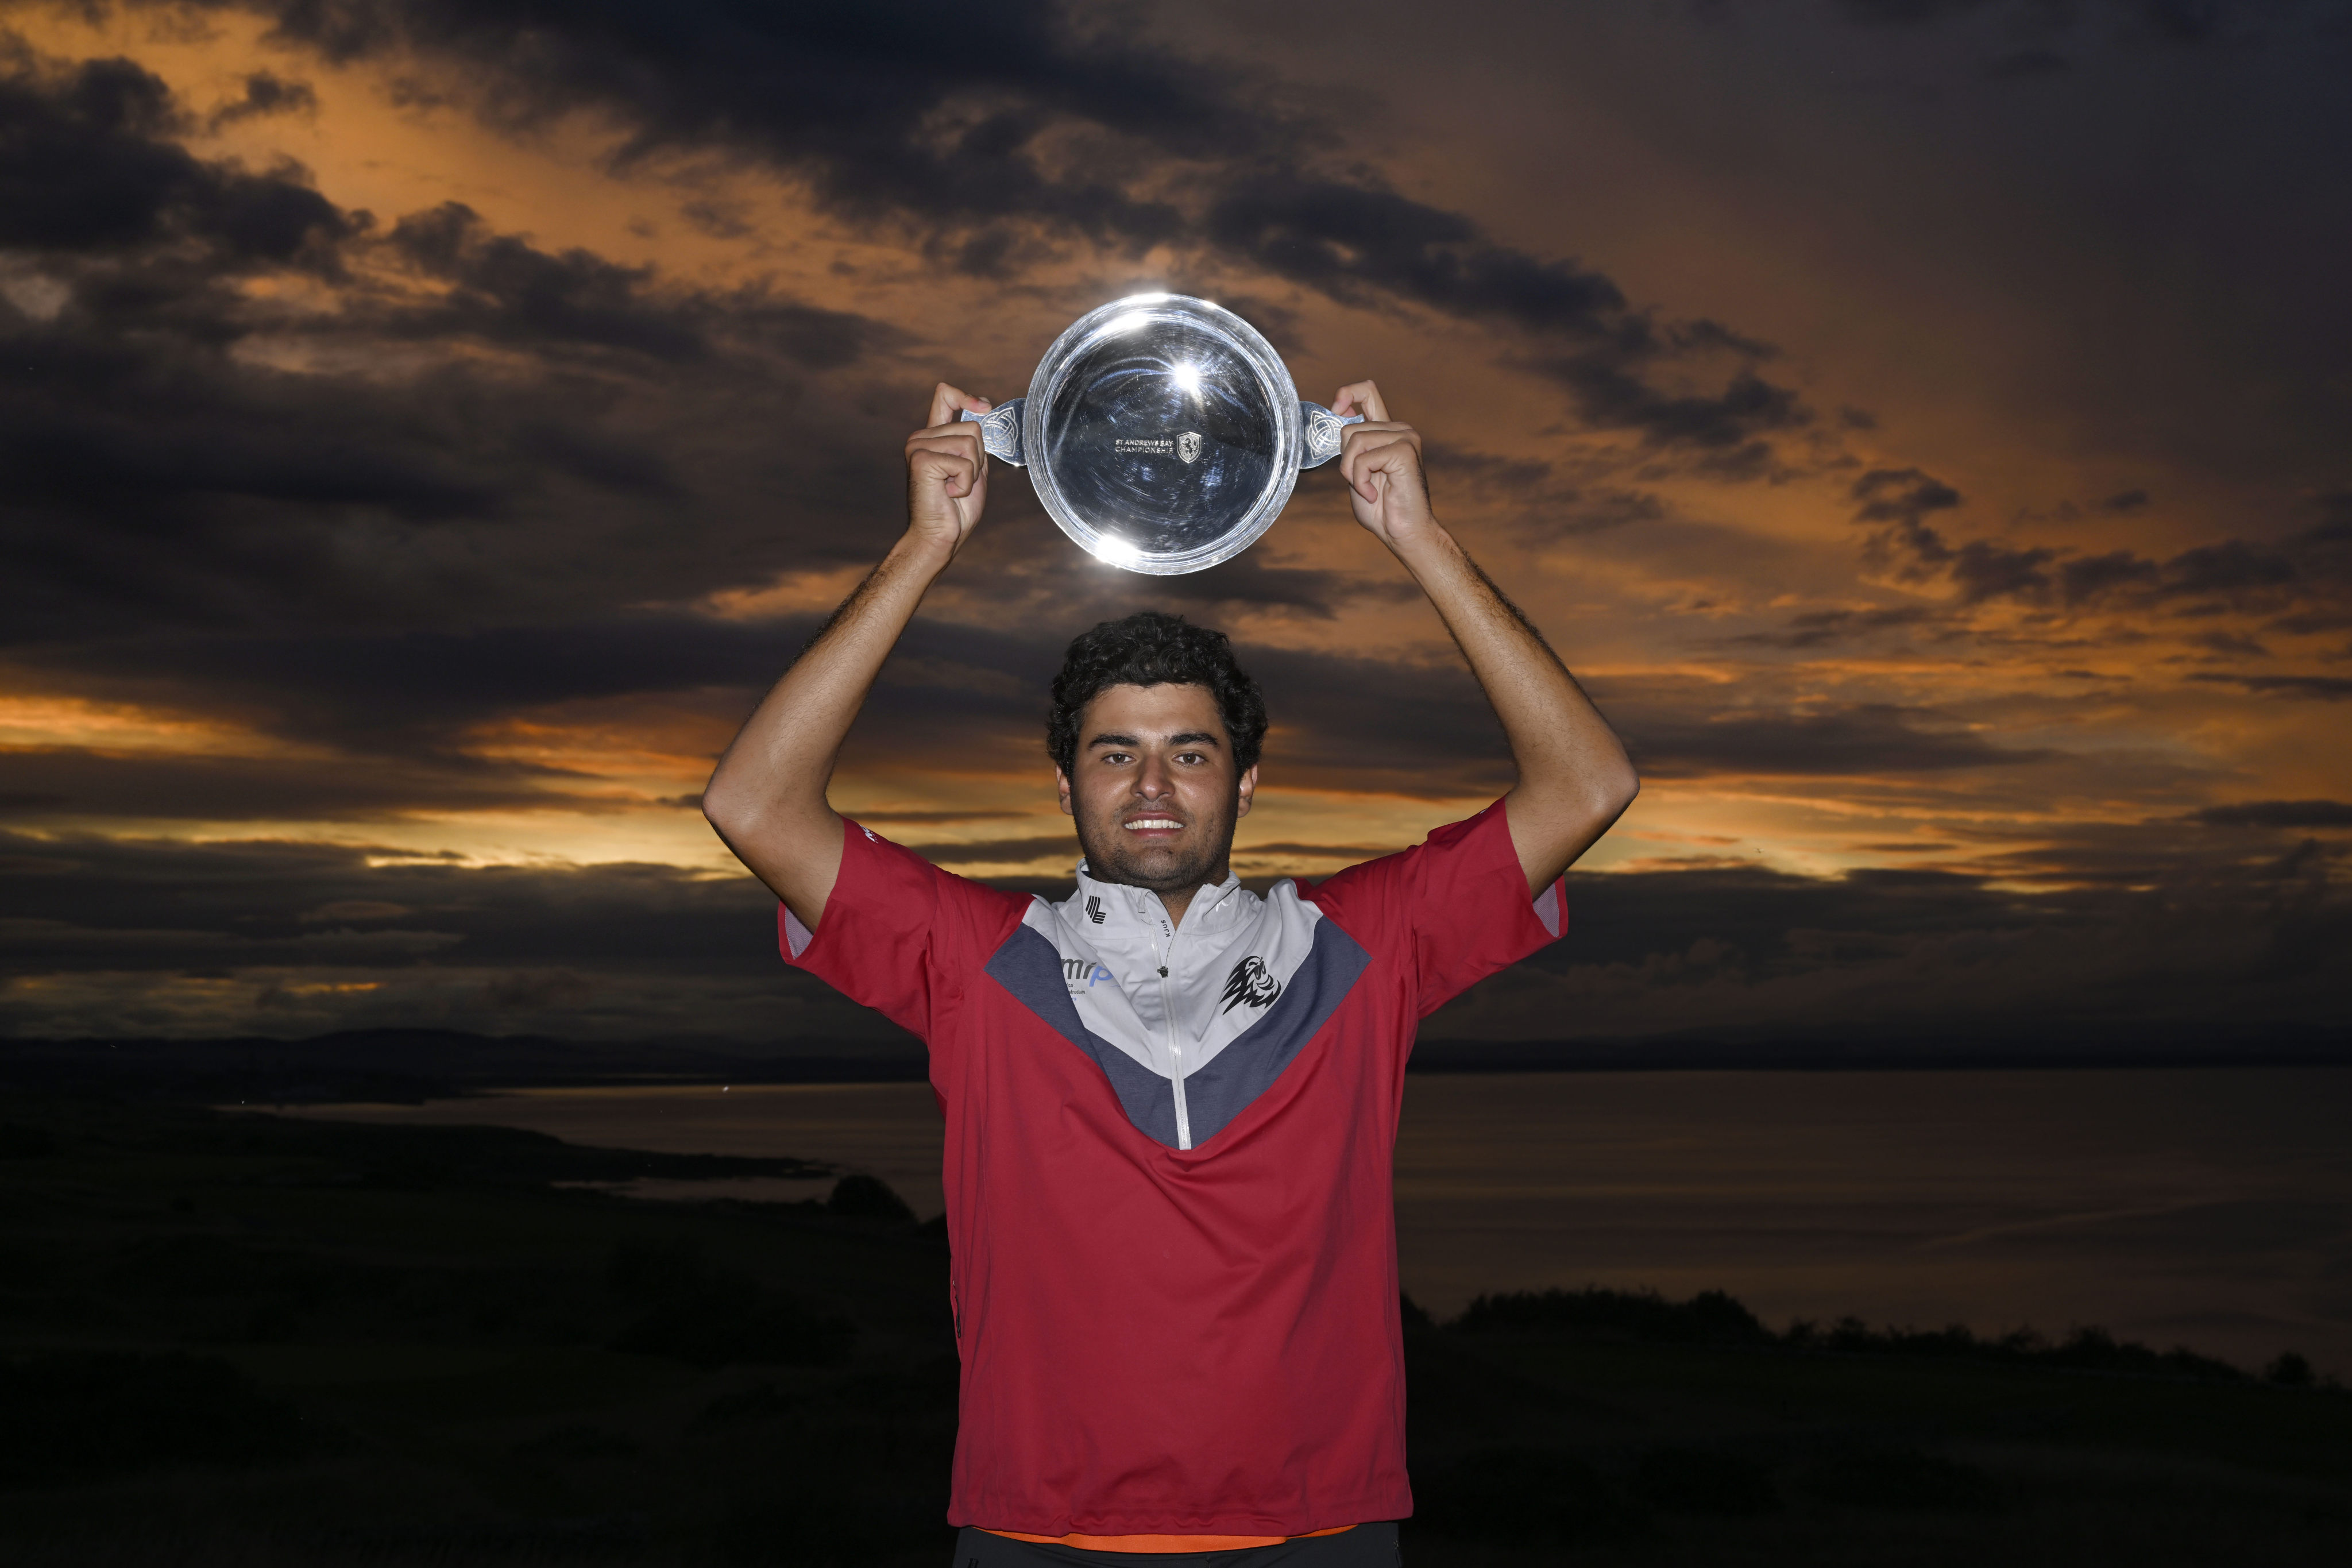 Spain’s Eugenio Chacarra lifts the St Andrews Bay Championship winner’s trophy after his marathon play-off victory. Photo: Asian Tour